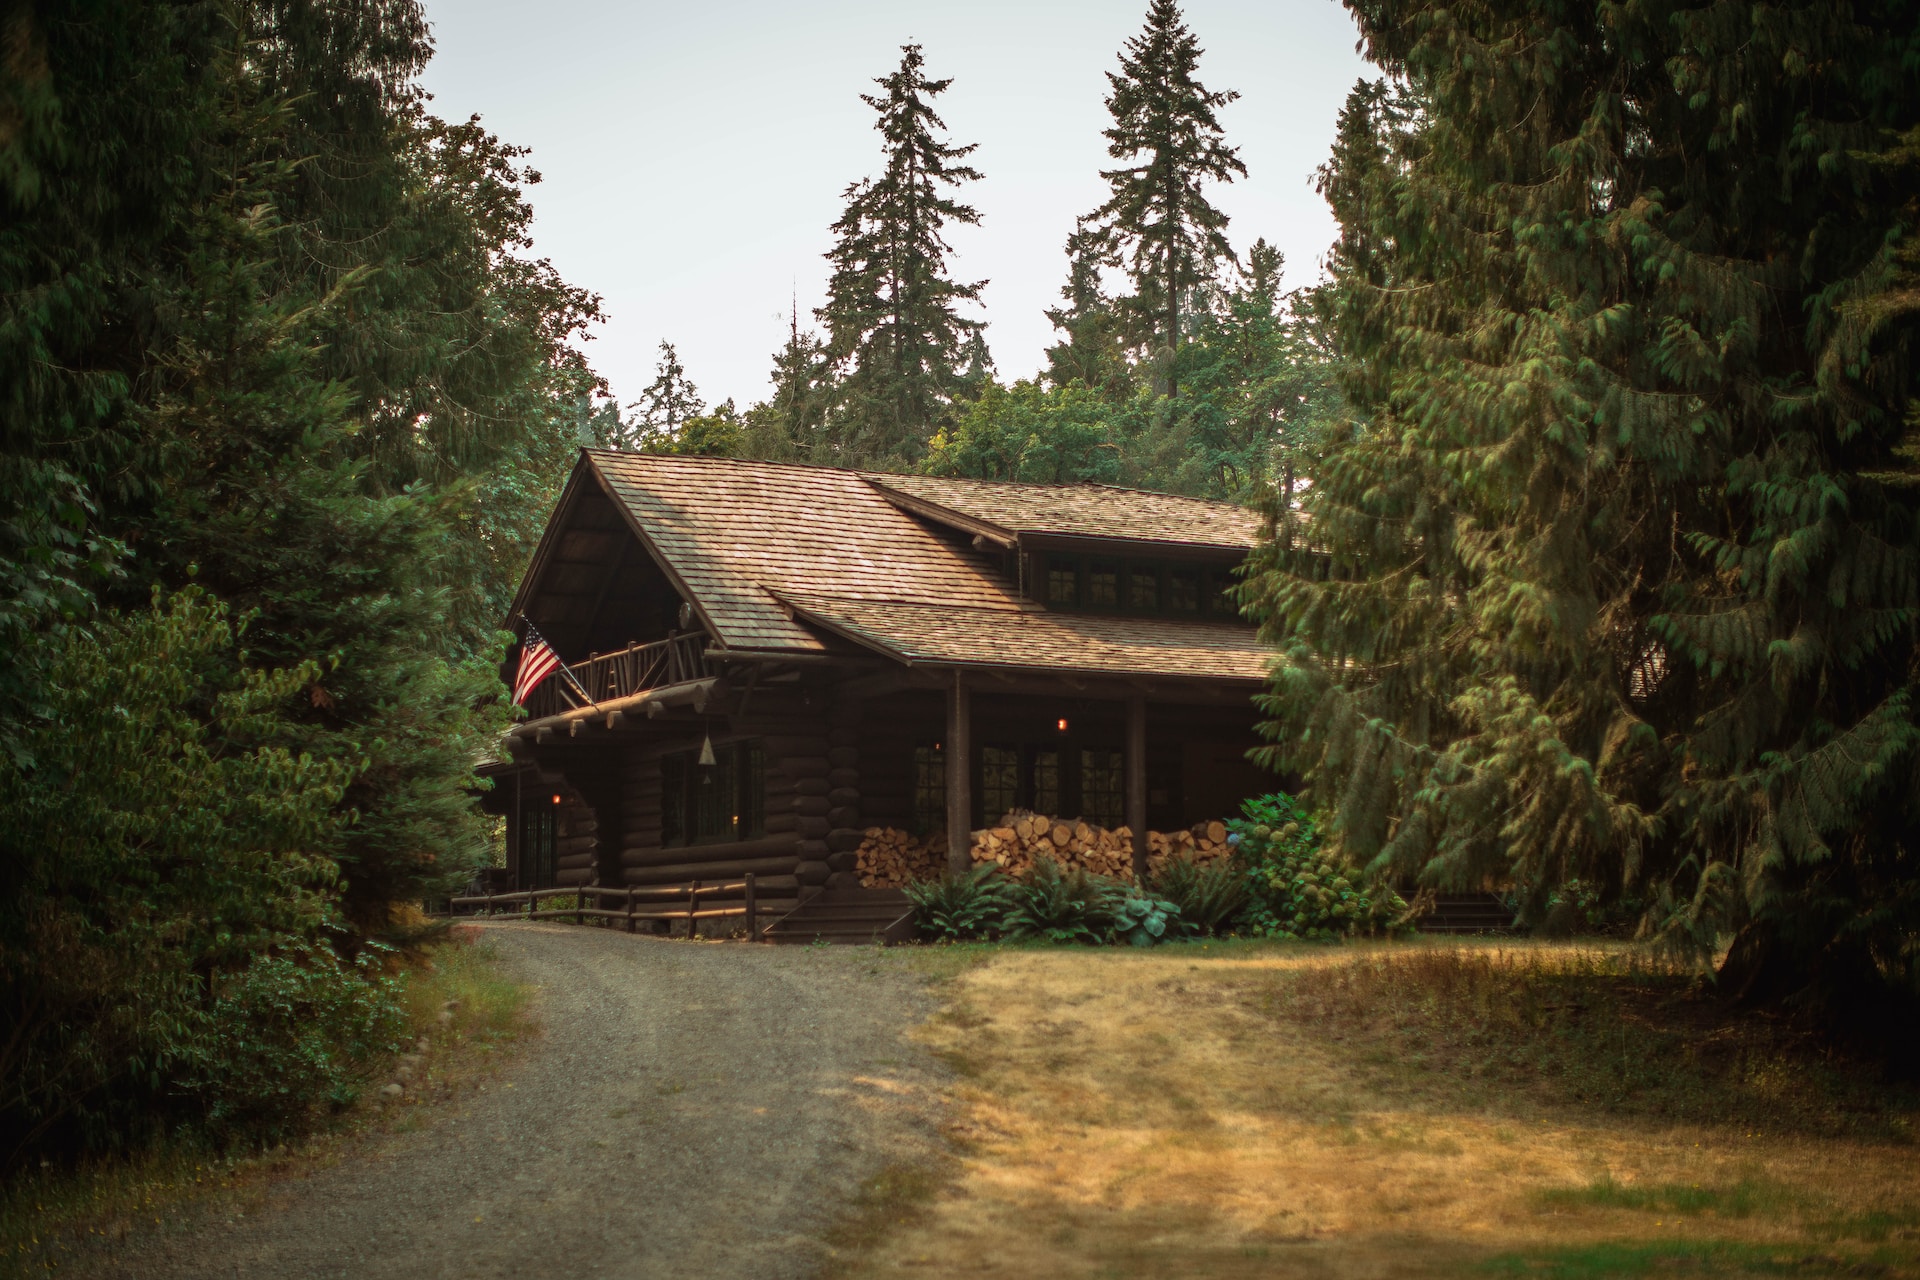 A cozy Complete BnB rental cabin amidst the stunning landscapes of the United States.